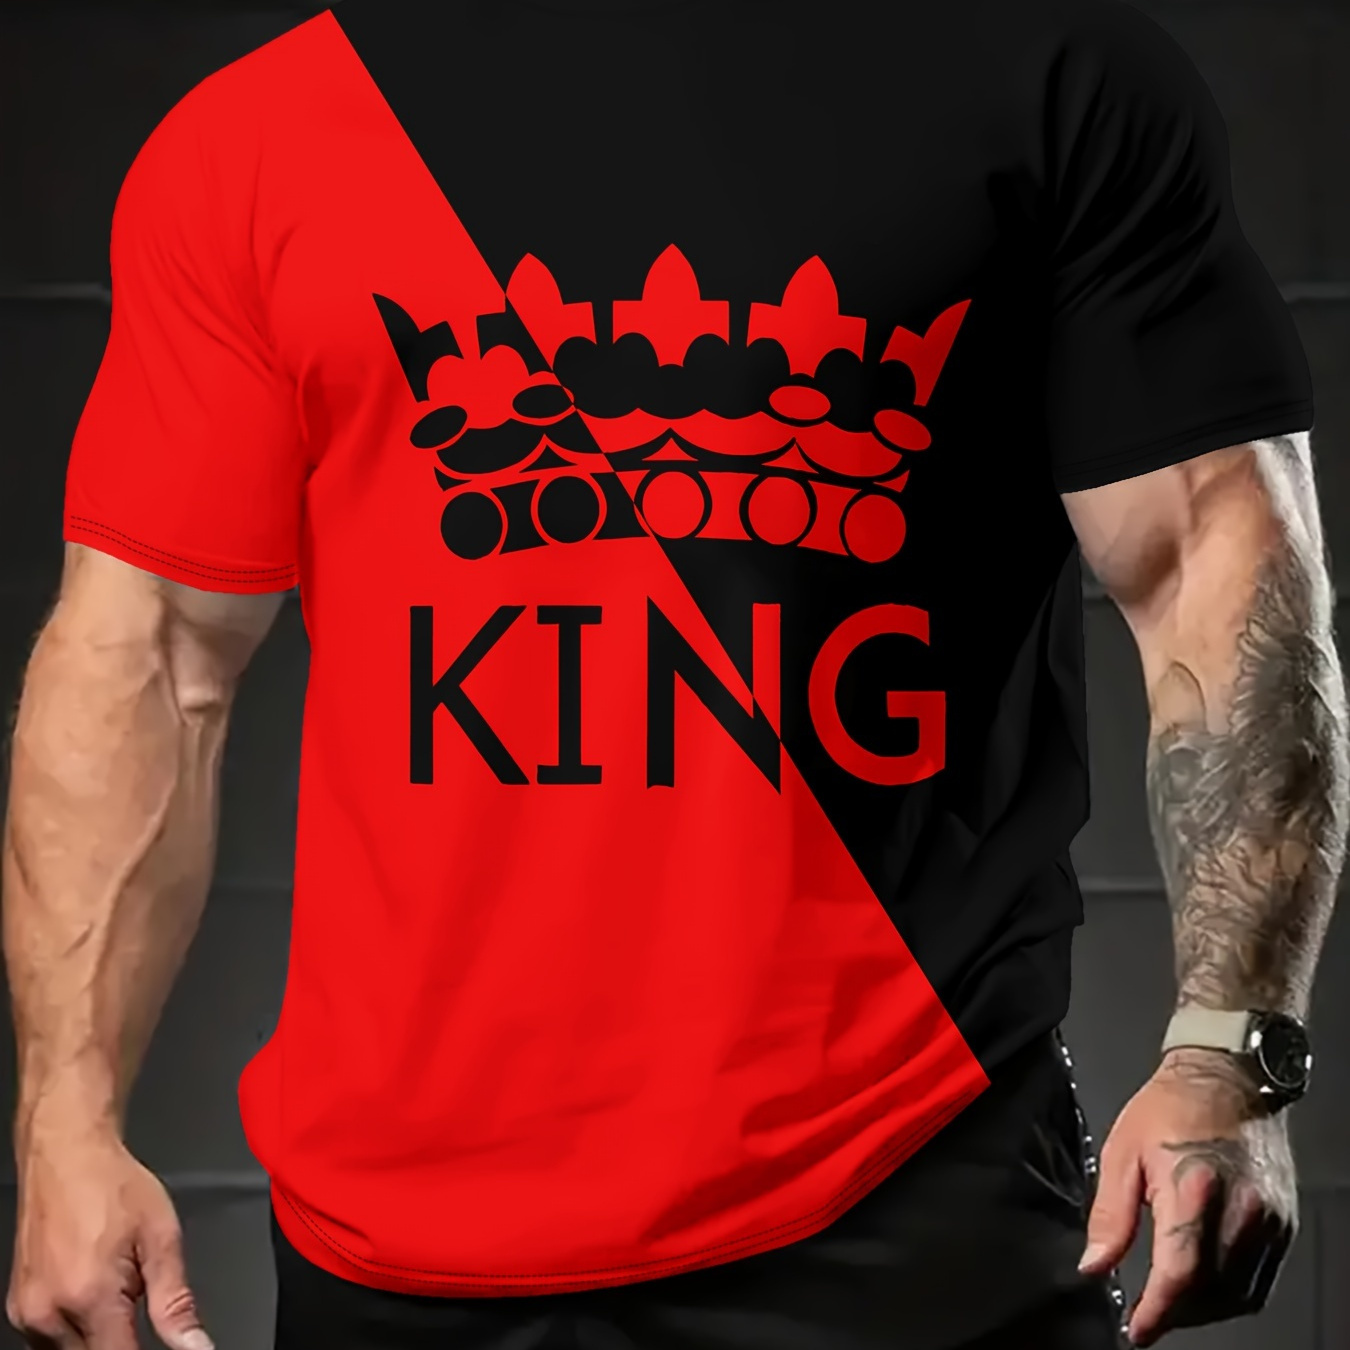 

King Alphabet Print Block Color Crew Neck Short Sleeve T-shirt For Men, Casual Summer T-shirt For Daily Wear And Vacation Resorts